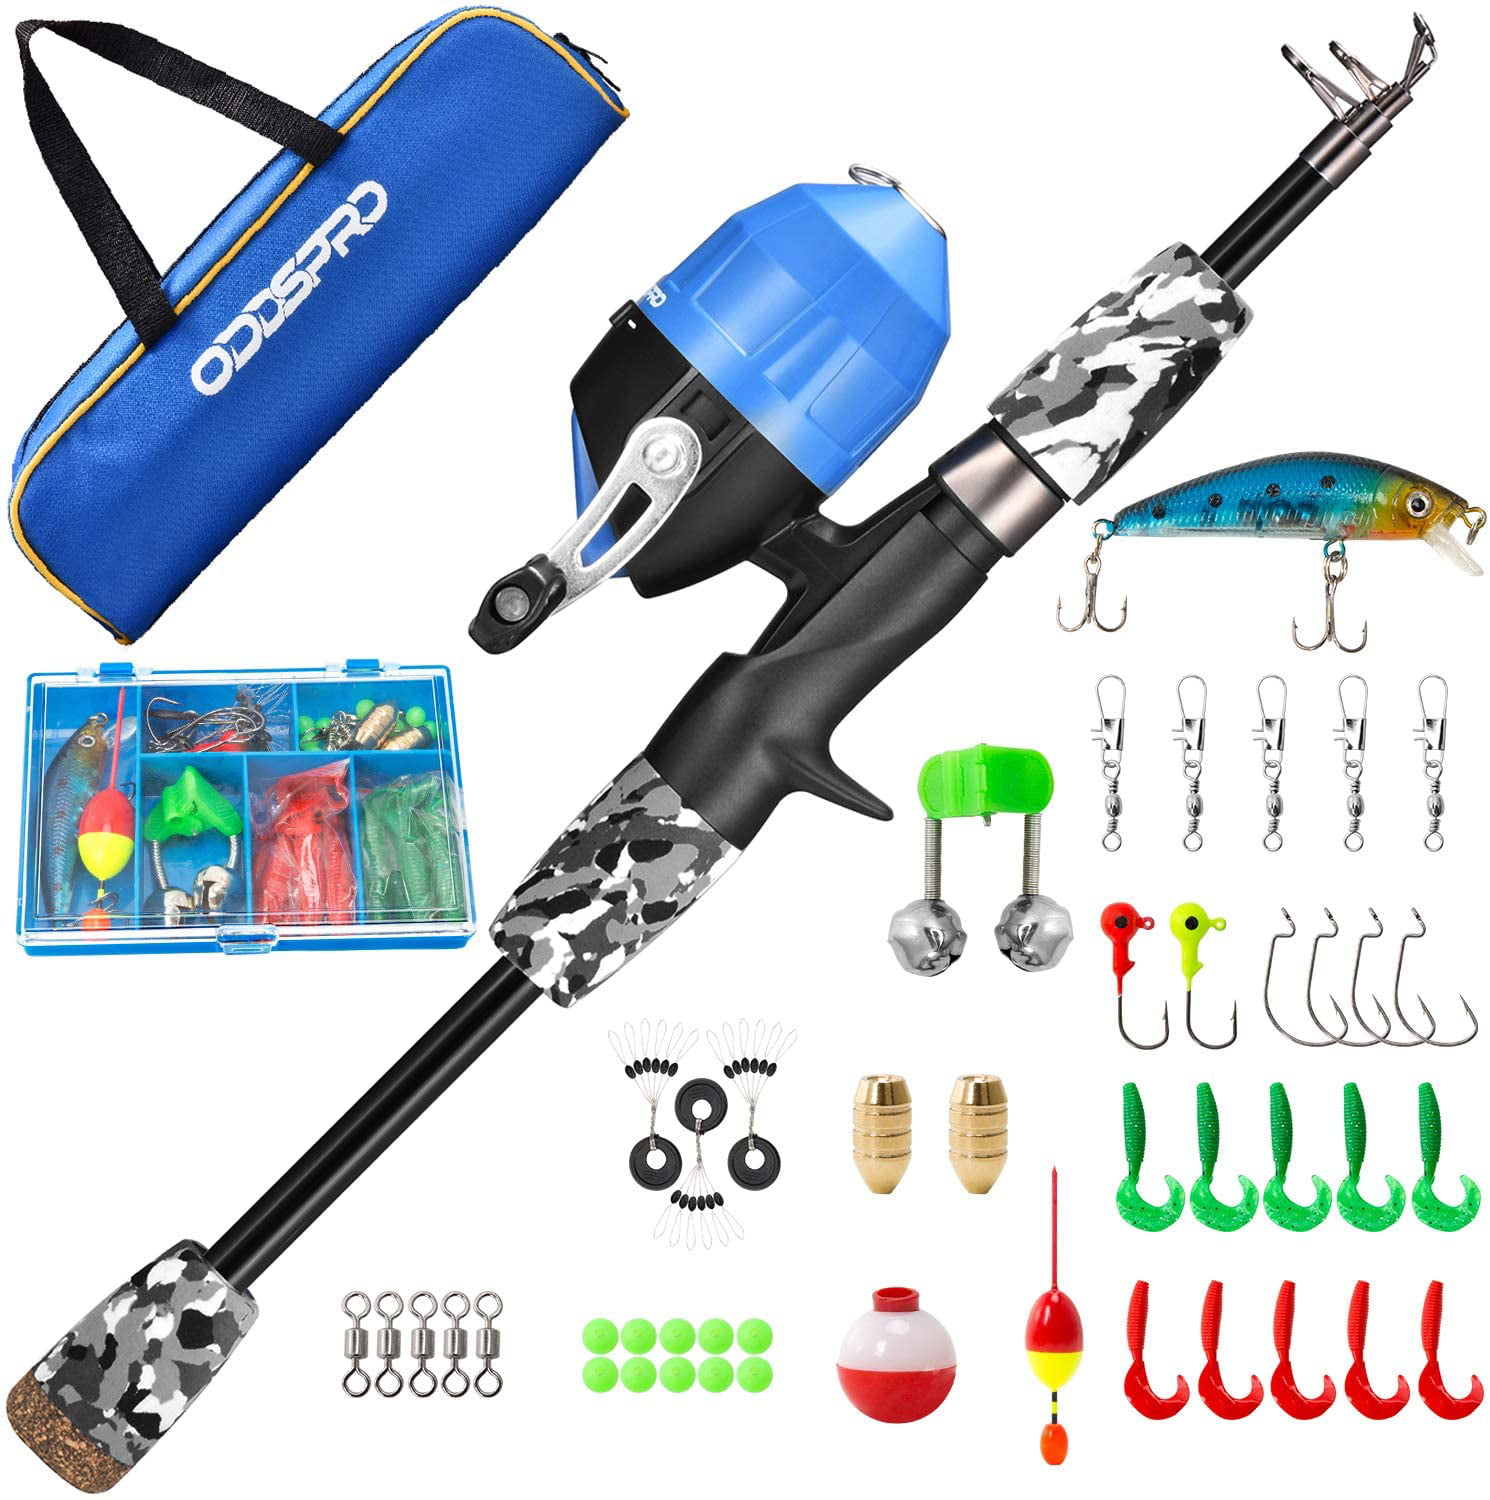 ODDSPRO Kids Fishing Pole, Portable Telescopic Fishing Rod and Reel Combo  Kit - with Spincast Fishing Reel Tackle Box for Boys, Girls, Youth black 